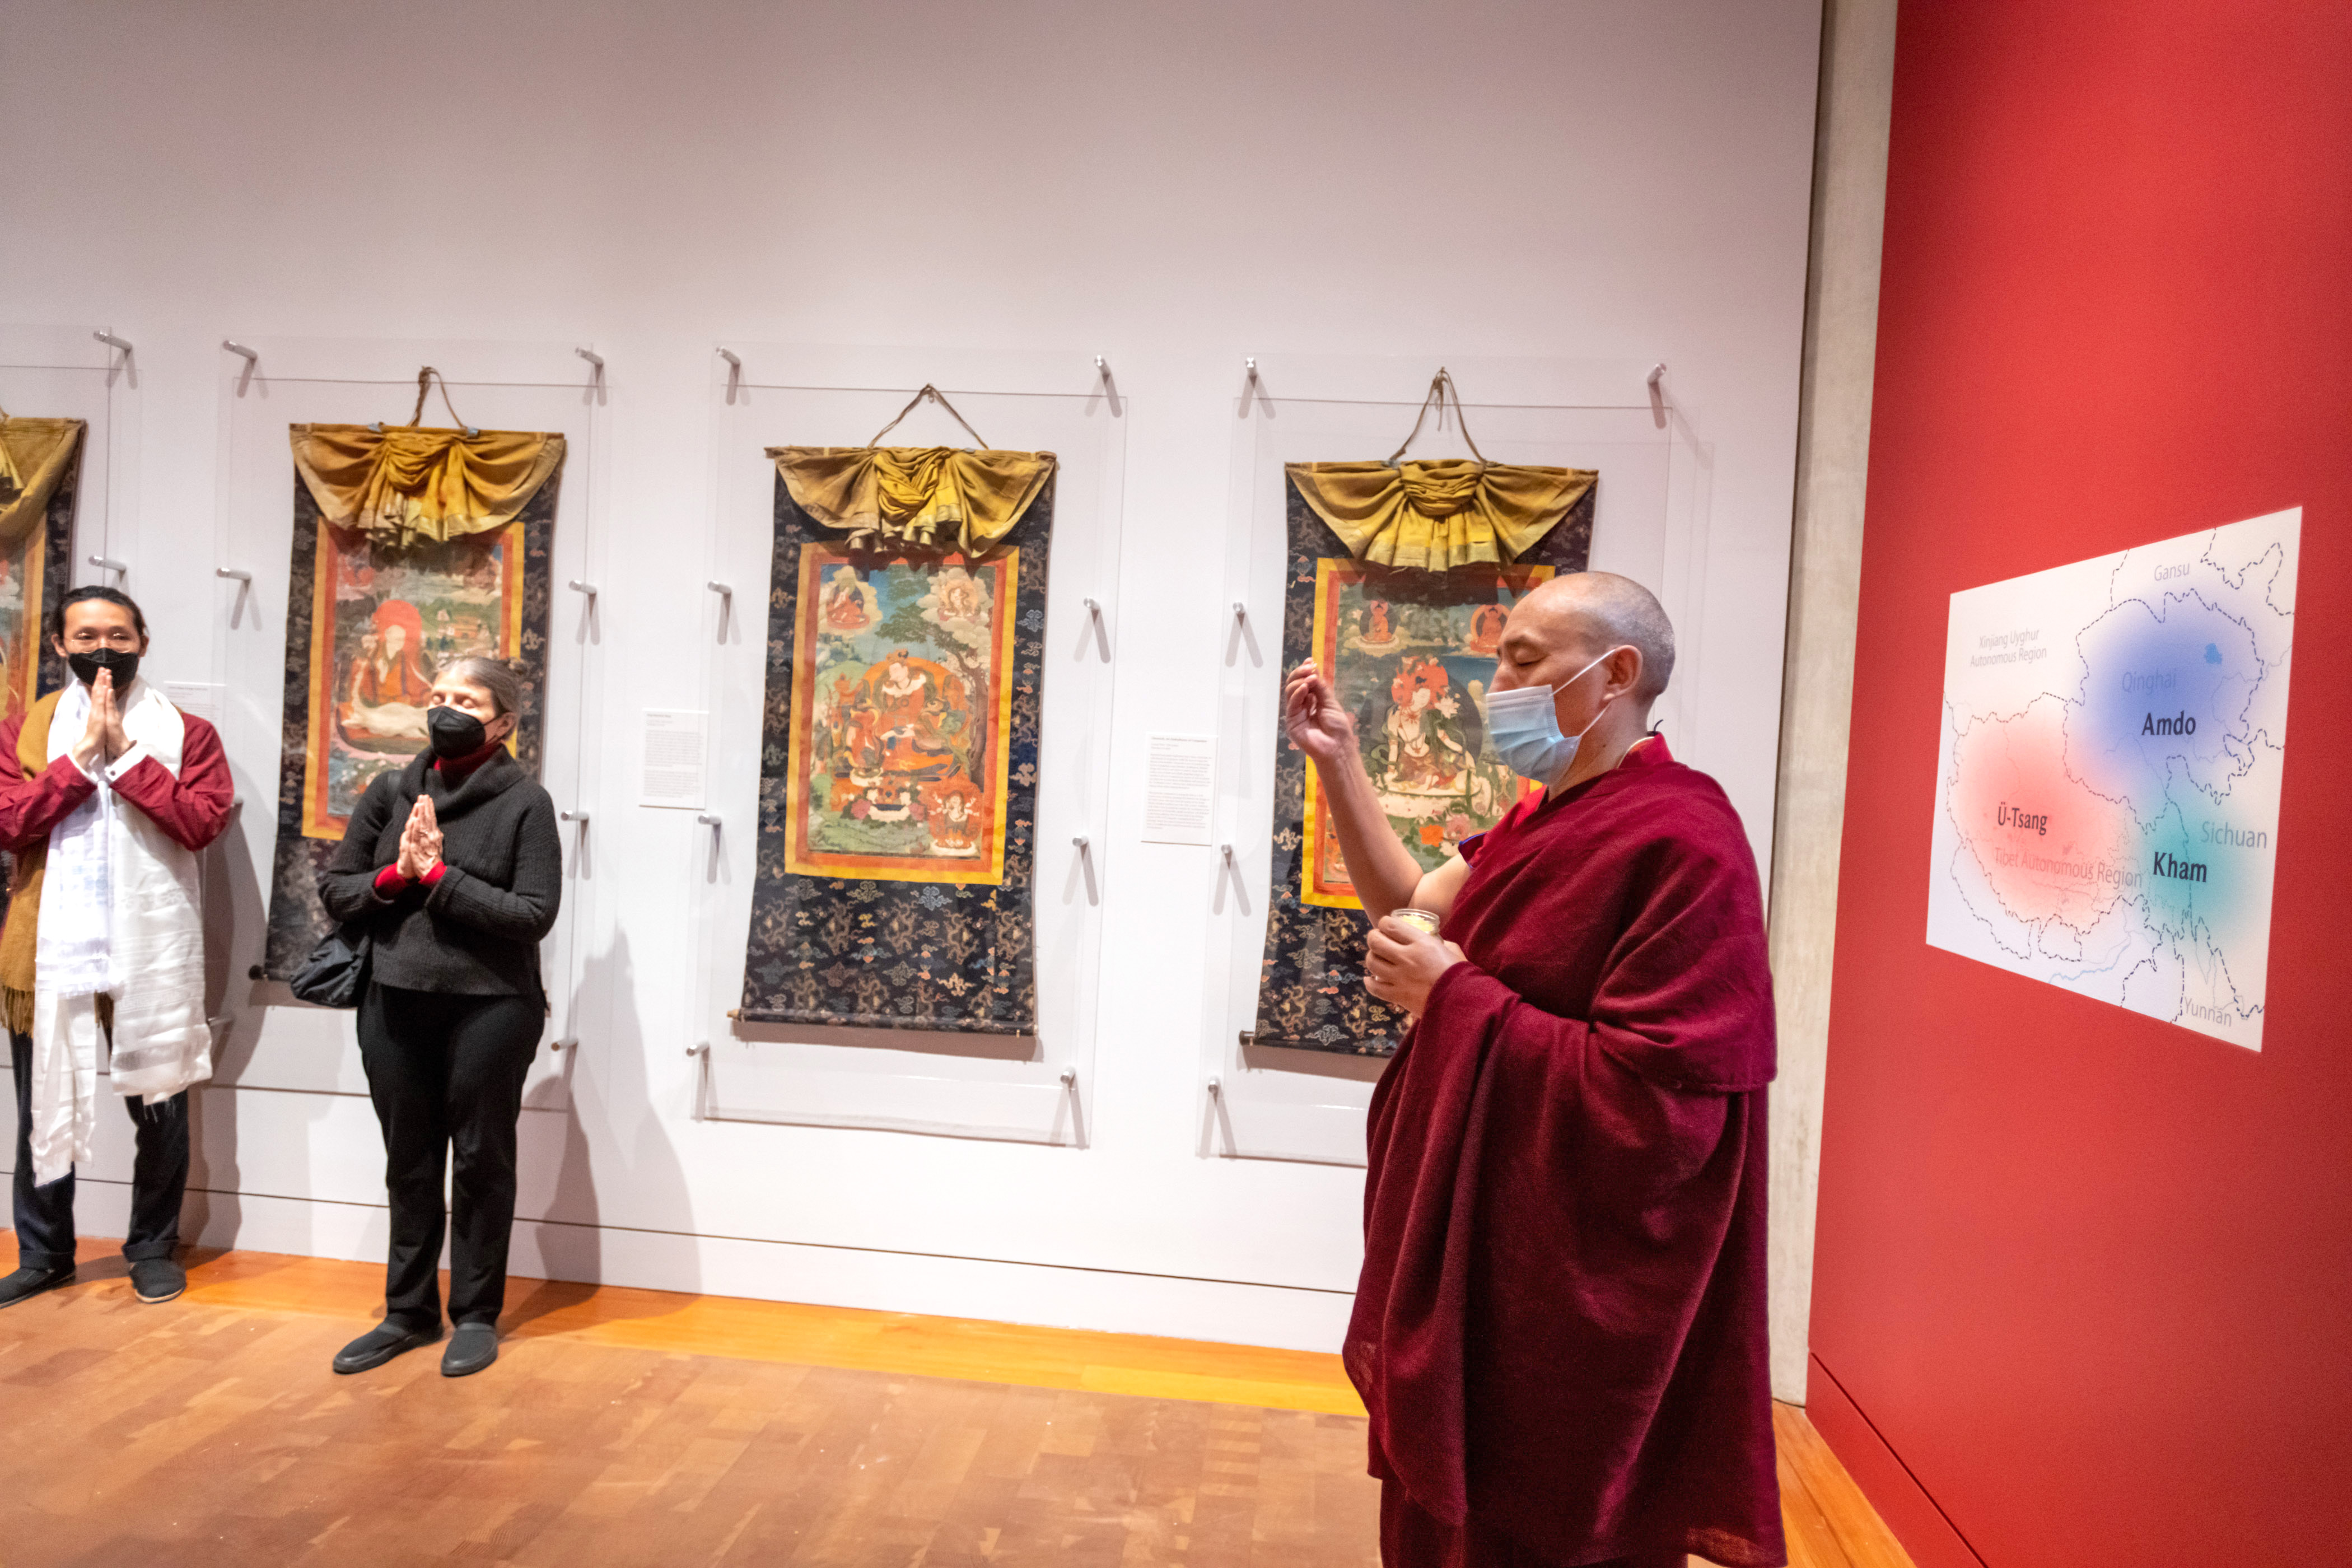 With a small handful of consecrated rice, Lama Tashi Topgyal blesses one of the works in the exhibit Mystery and Merit: Tibetan Art from the Jack Shear Collection, at the Loeb.